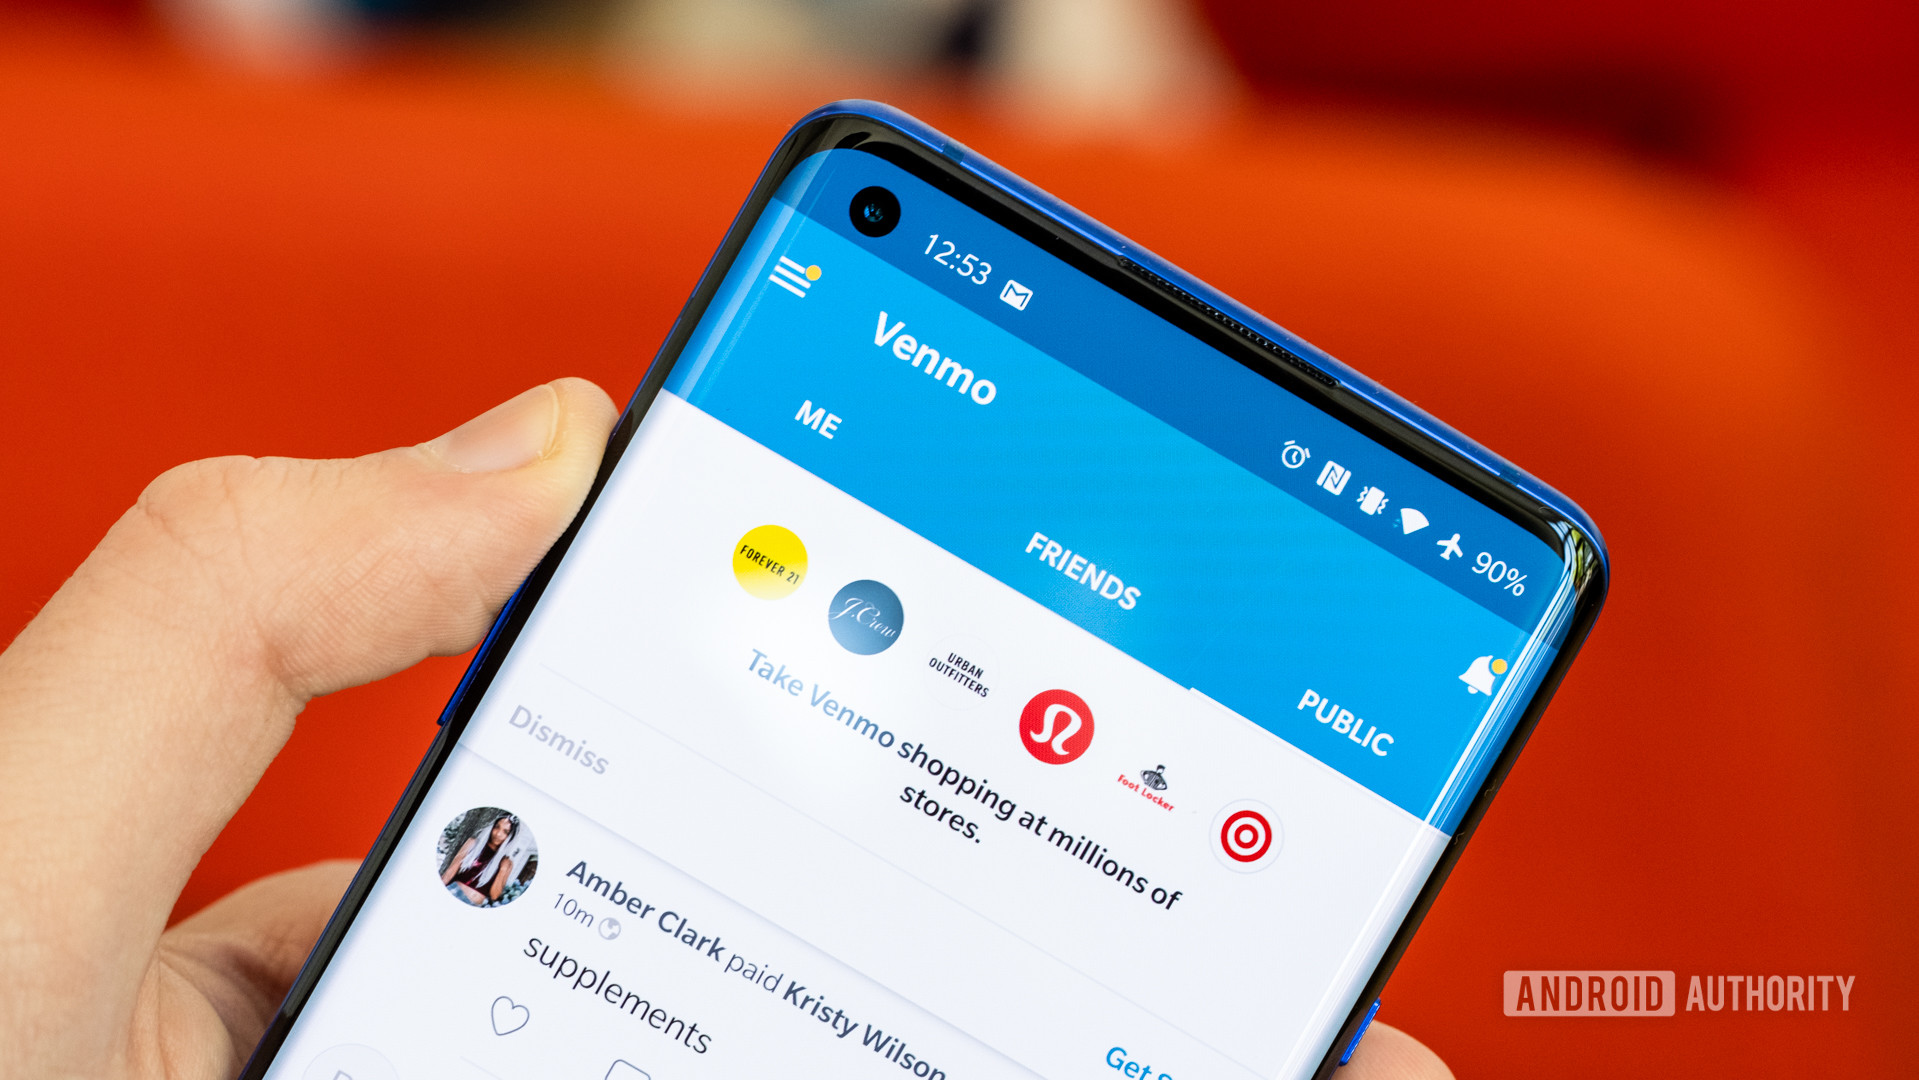 The Venmo app running on a smartphone being held in a hand against a blurry red background.